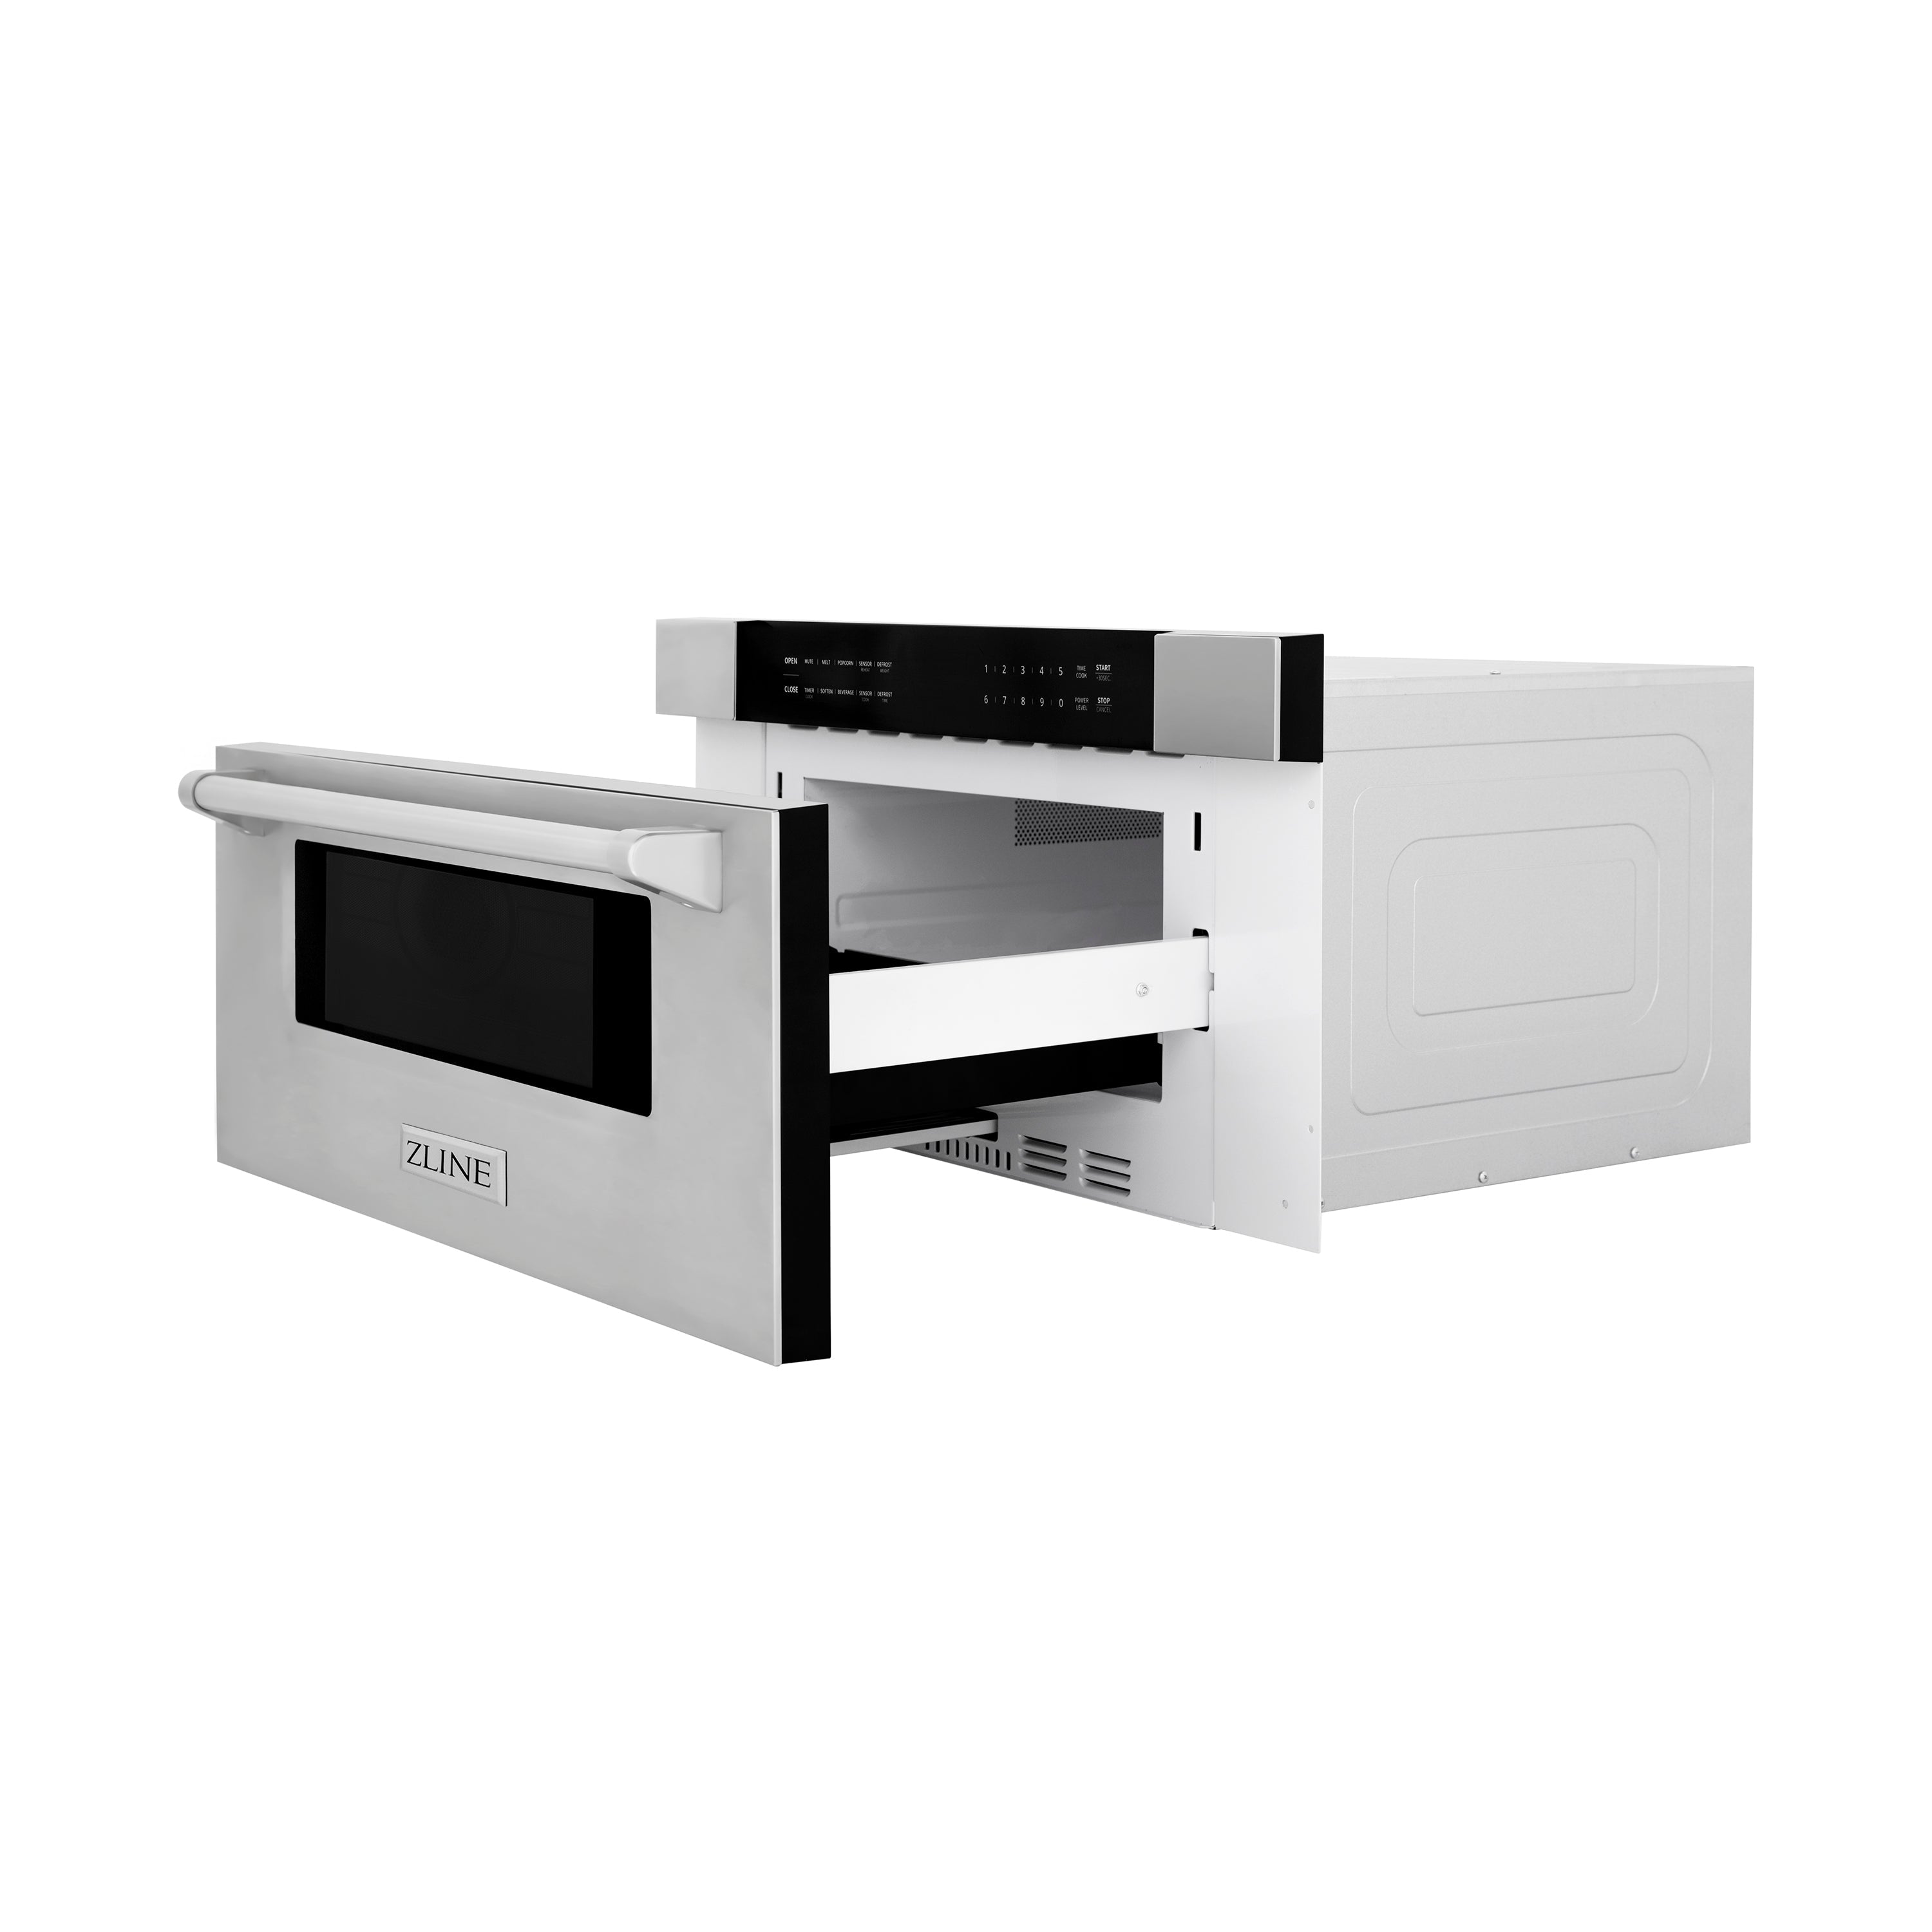 ZLINE 30 in. 1.2 cu. ft. Stainless Steel Built-In Microwave Drawer (MWD-30) Side View Drawer Open